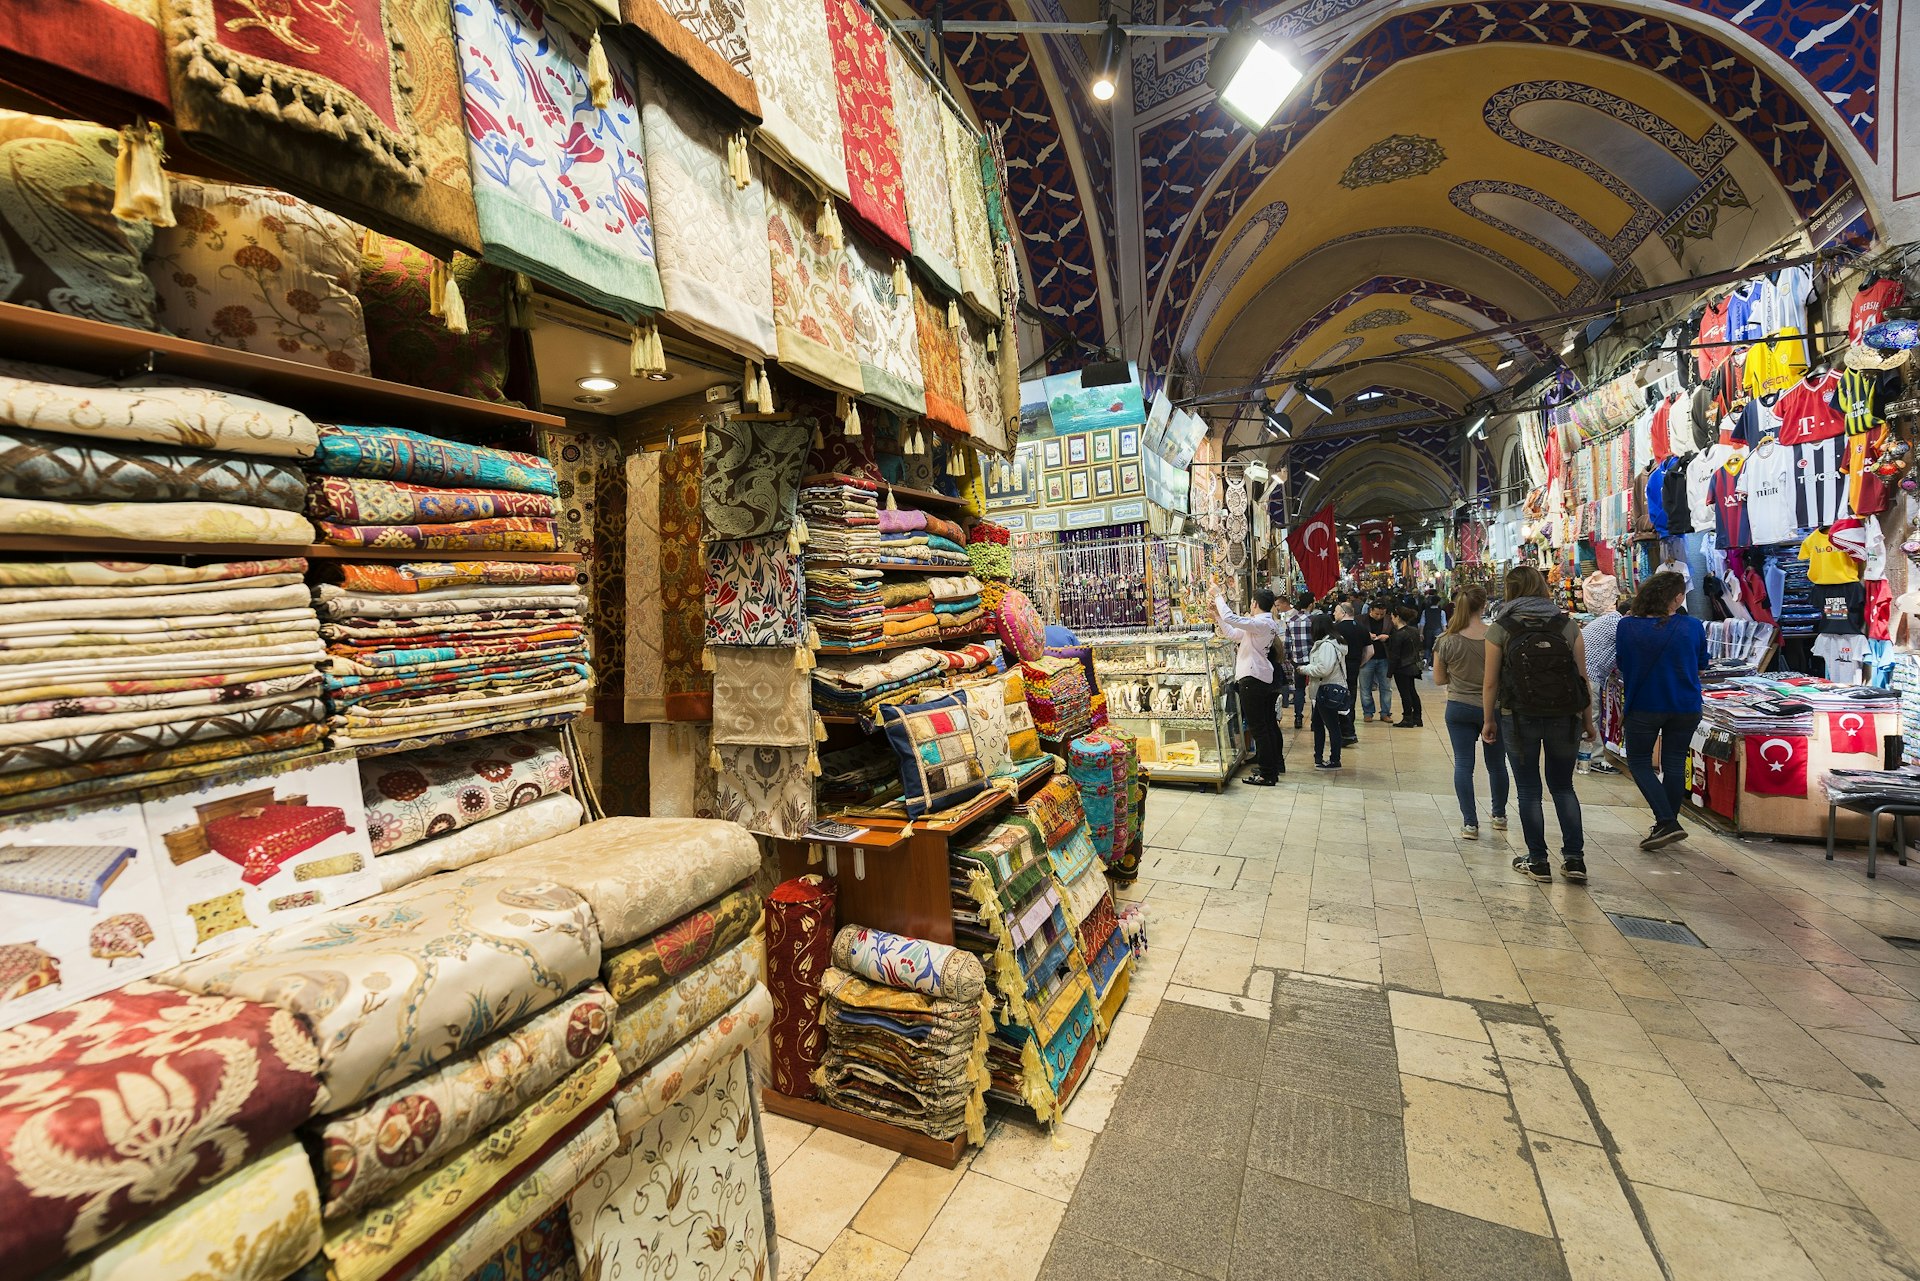 A display outside a shop within a large covered market shows many different heavily patterned textiles for sale